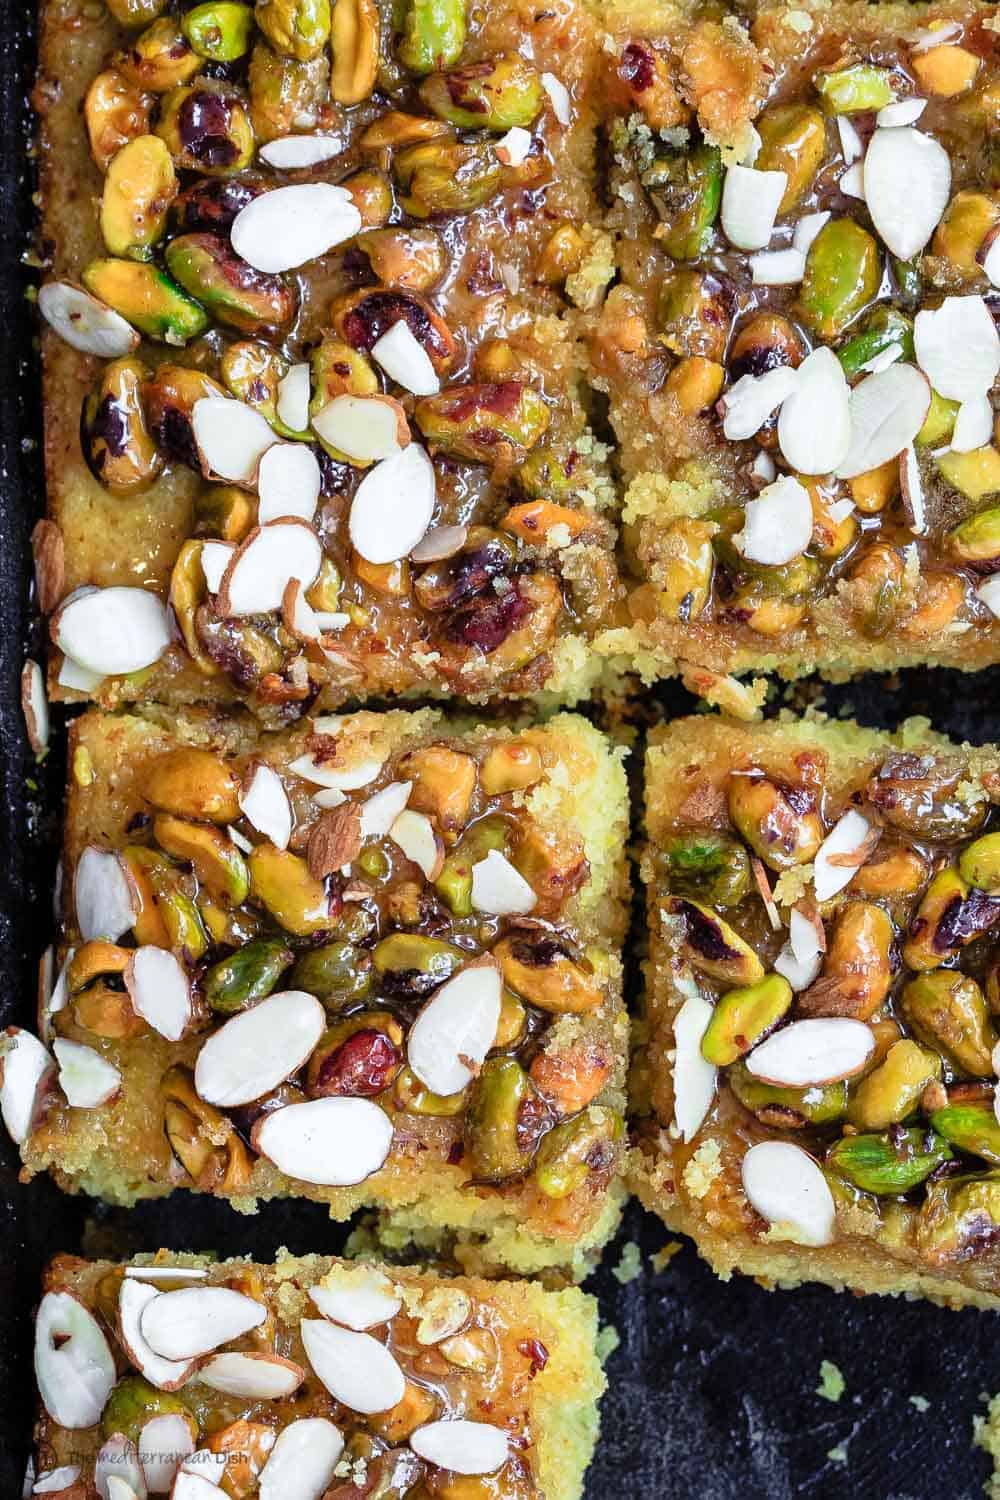 Close-up of slices of Greek Honey Orange Cake garnished with pistachios and almonds.